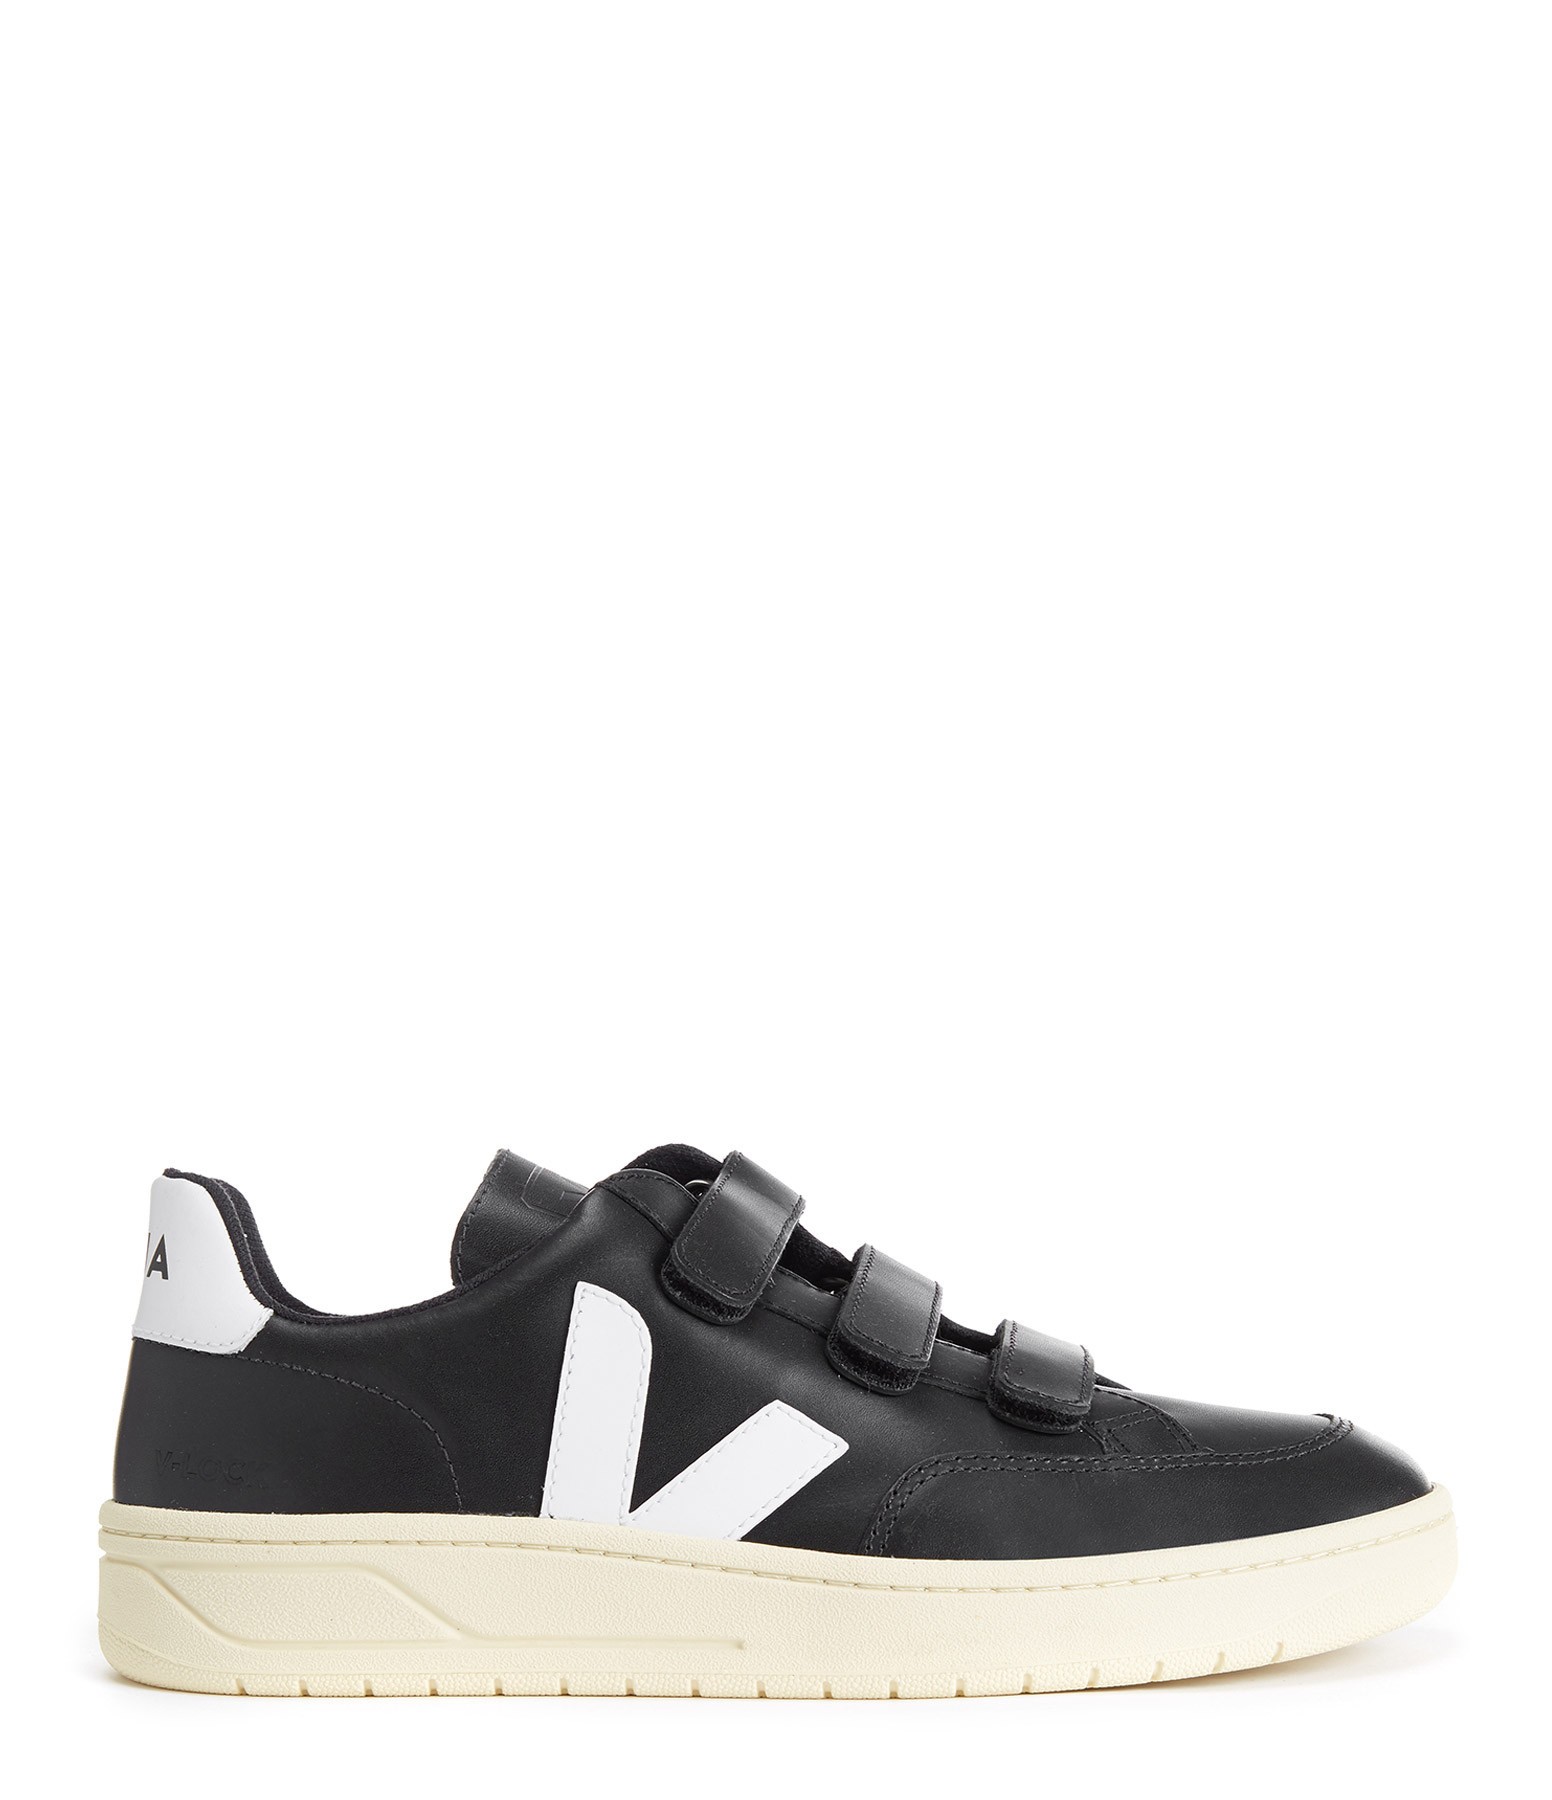 VEJA V-Lock Sneakers in black white leather XC022102 - New Collection Spring Summer 2020